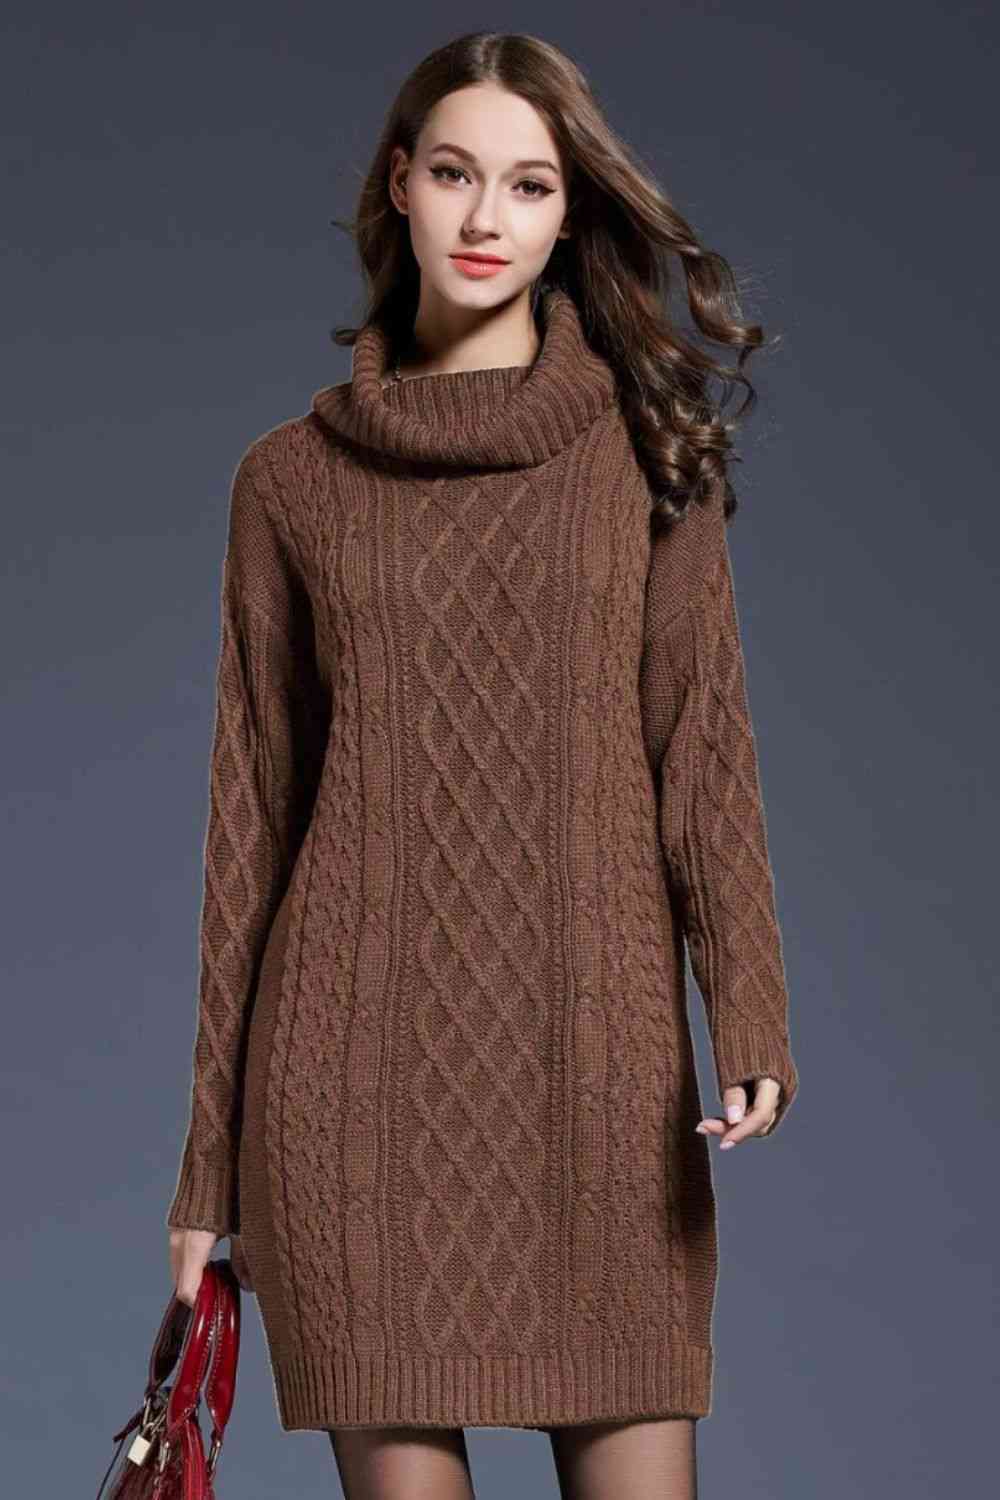 Woven Right Full Size Mixed Knit Cowl Neck Dropped Shoulder Sweater Dress Brown